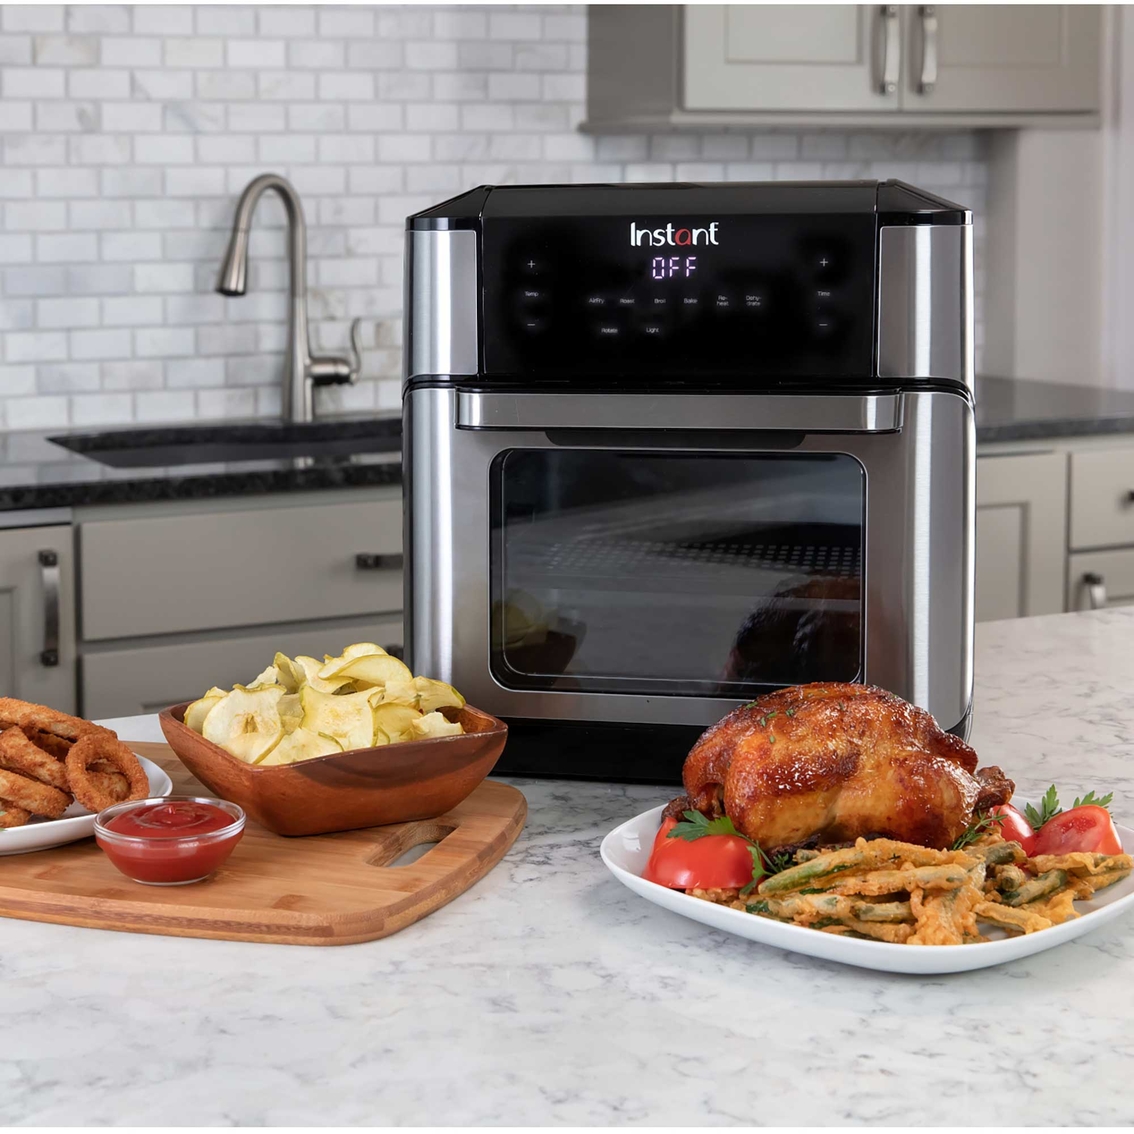 Instant's Vortex Mini air fryer is on sale for $40